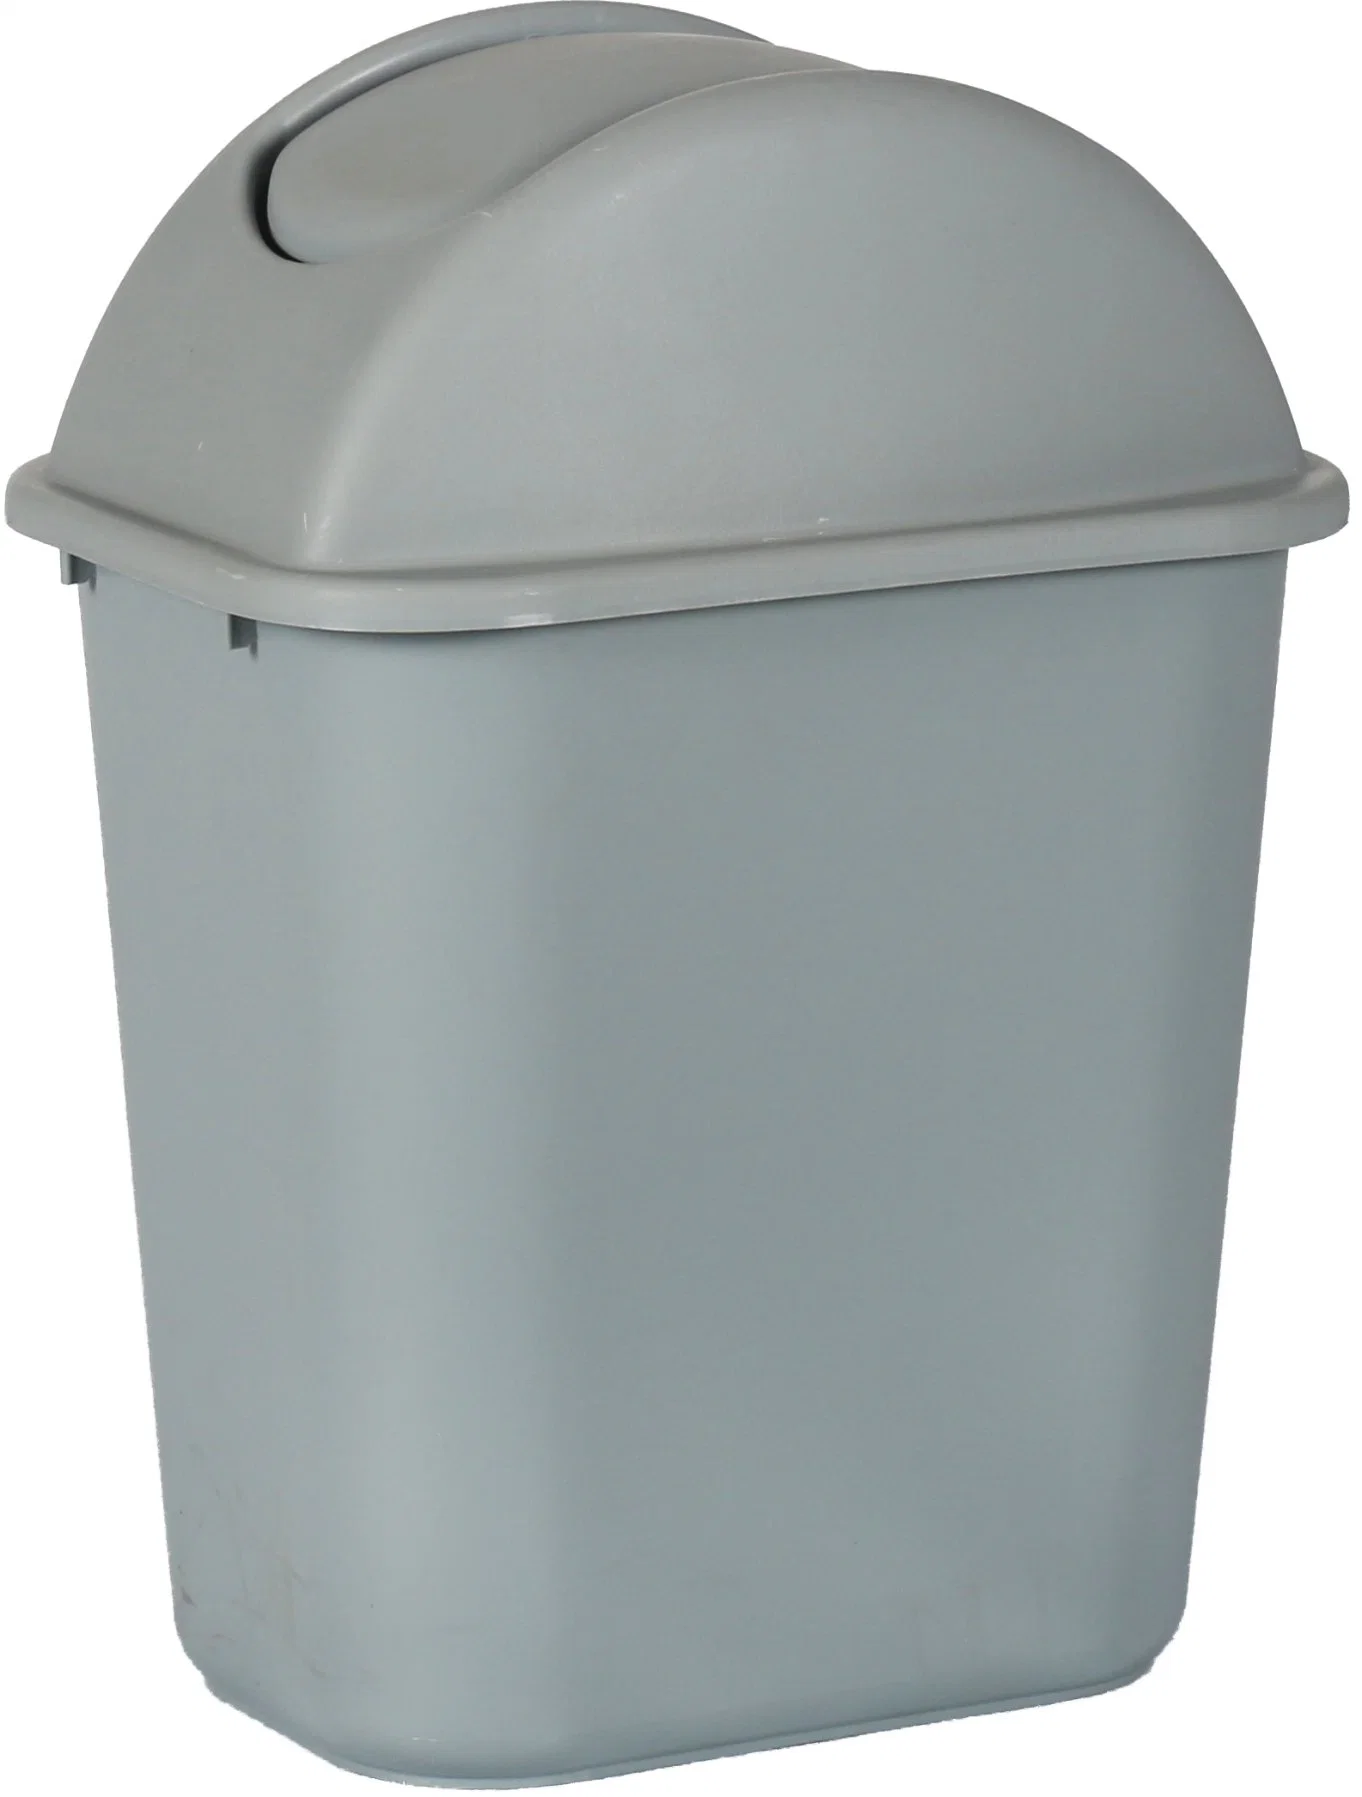 23liter / 42liter Square Plastic Dustbin with Cover for Office